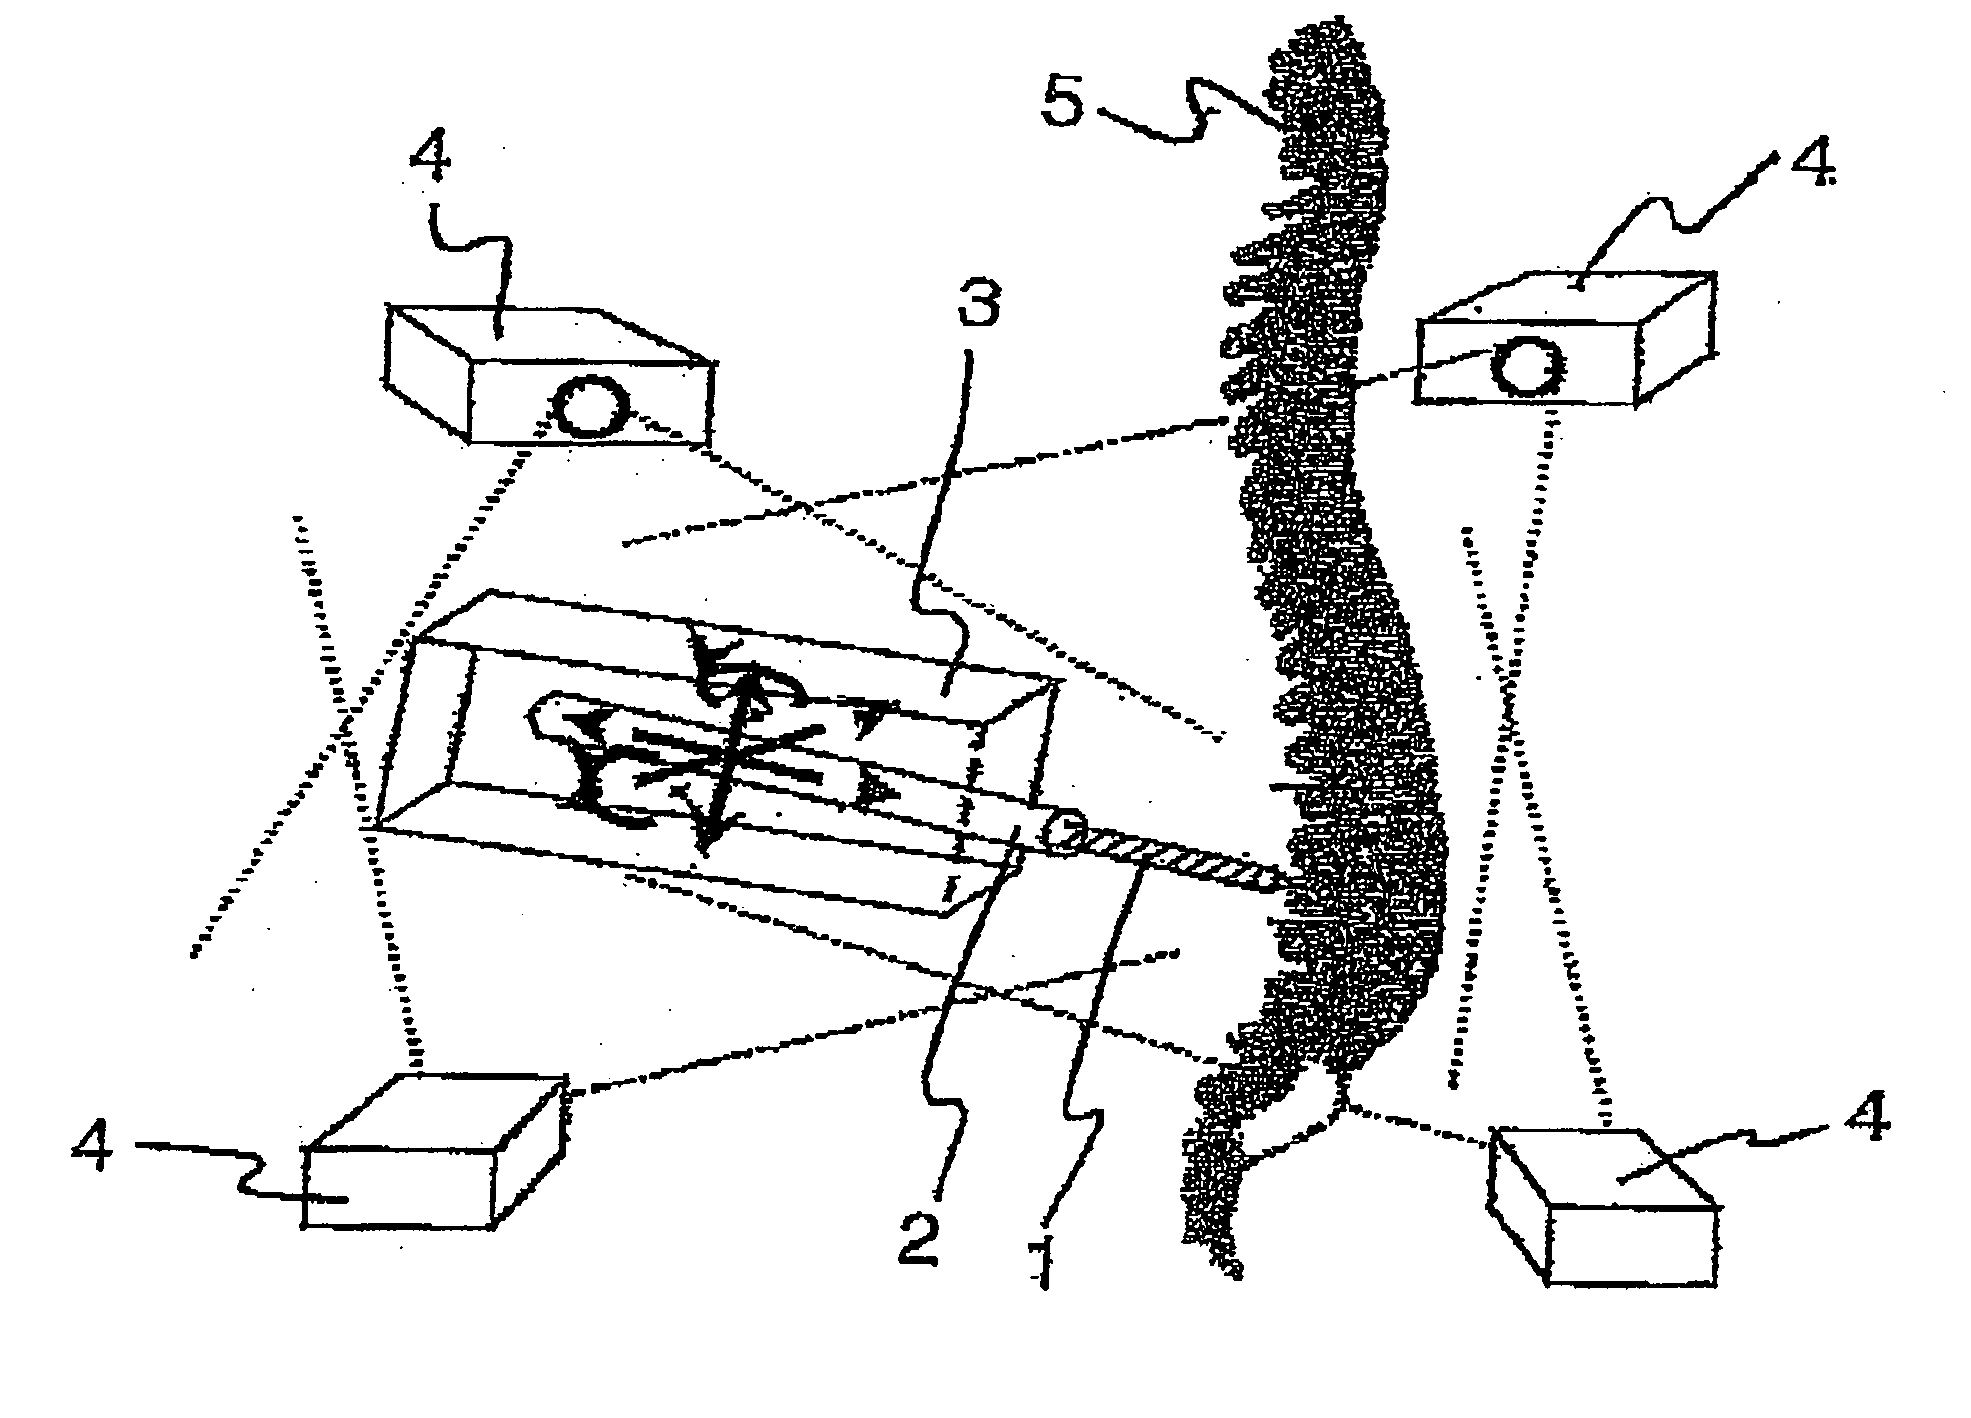 Device and method for treating parts of a human or animal body